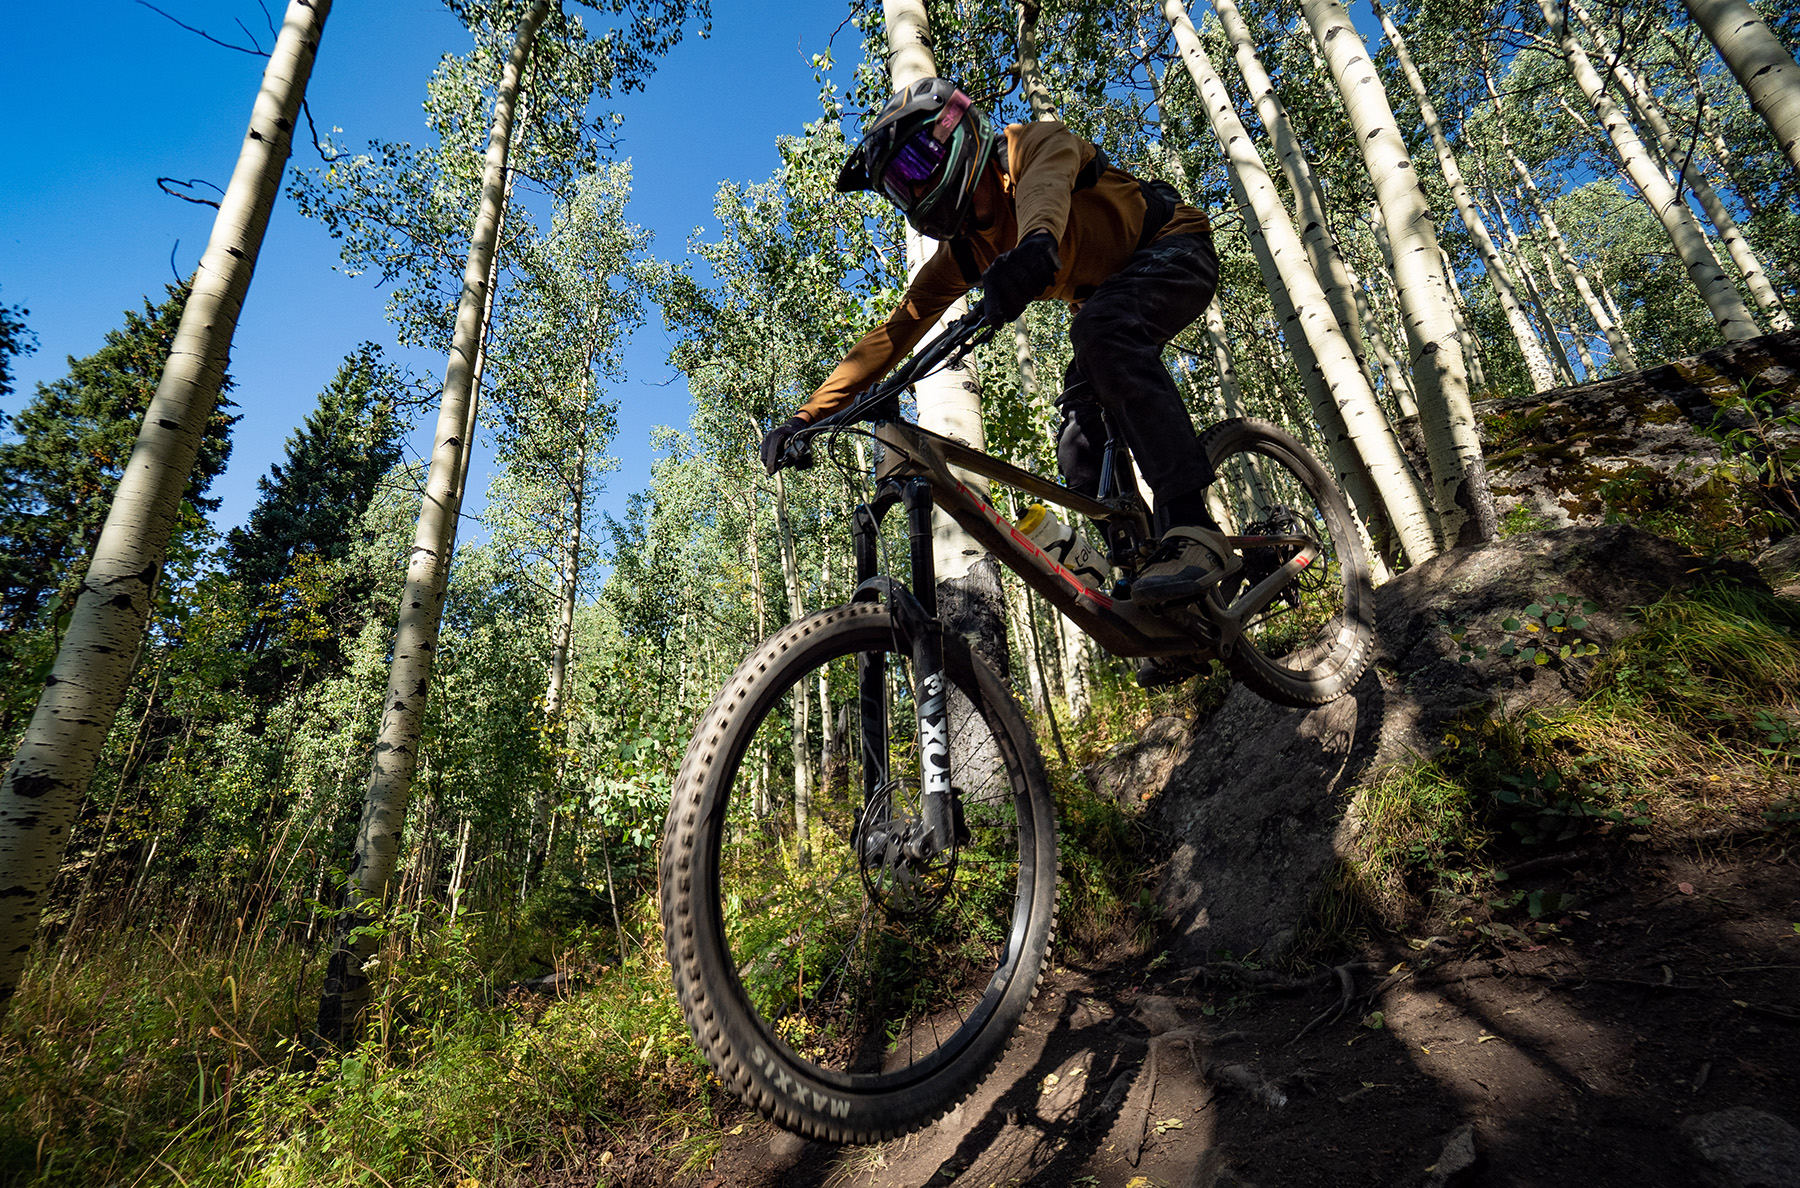 Eric Freson and Dylan Wood review the Intense Tracer 279 for Blister